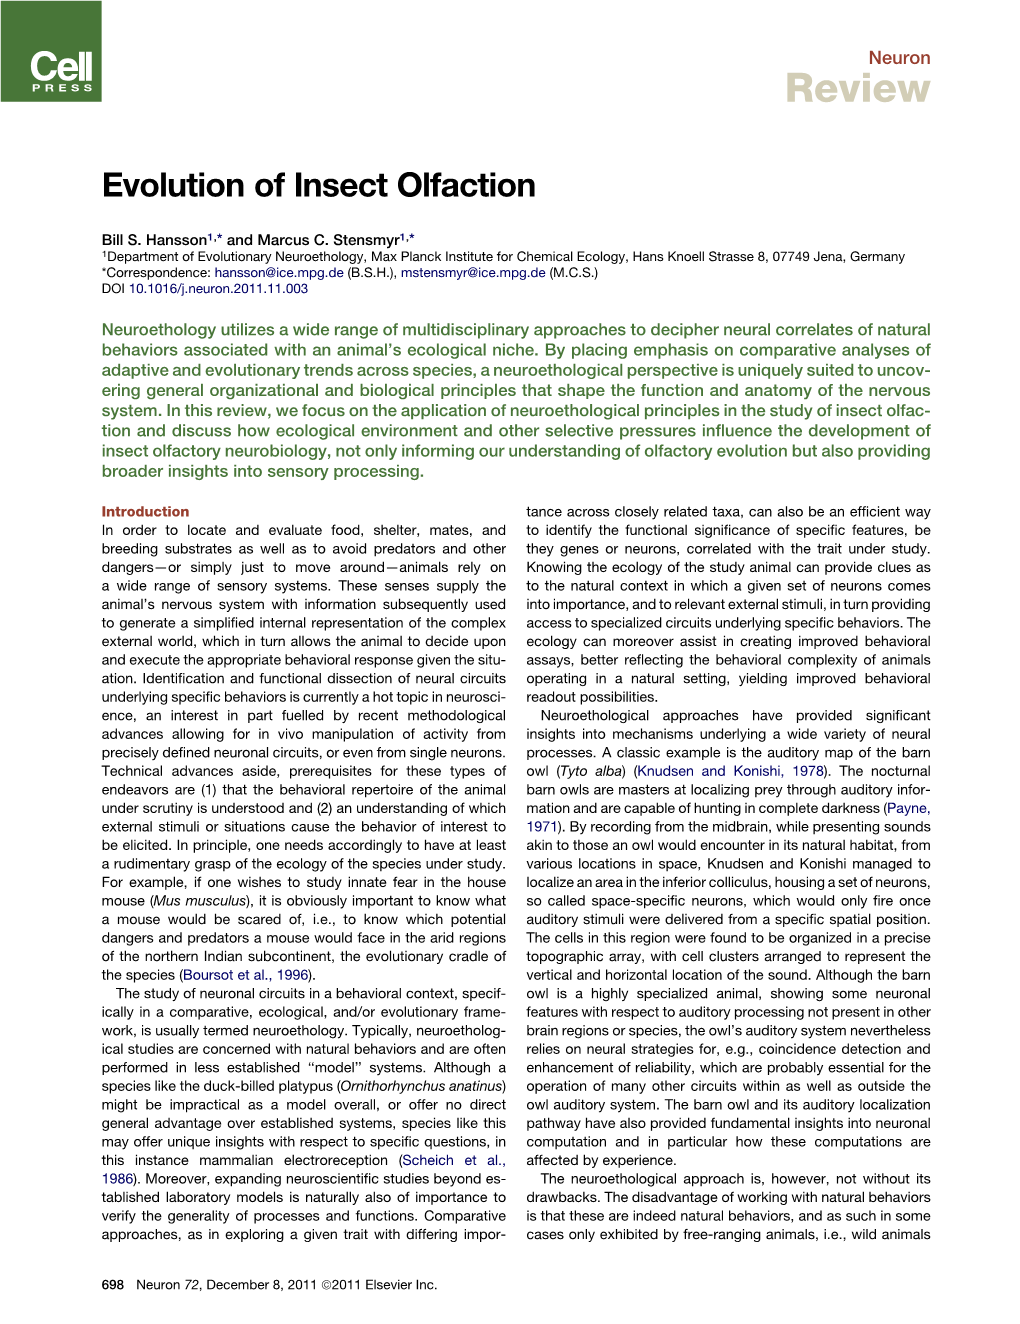 Evolution of Insect Olfaction